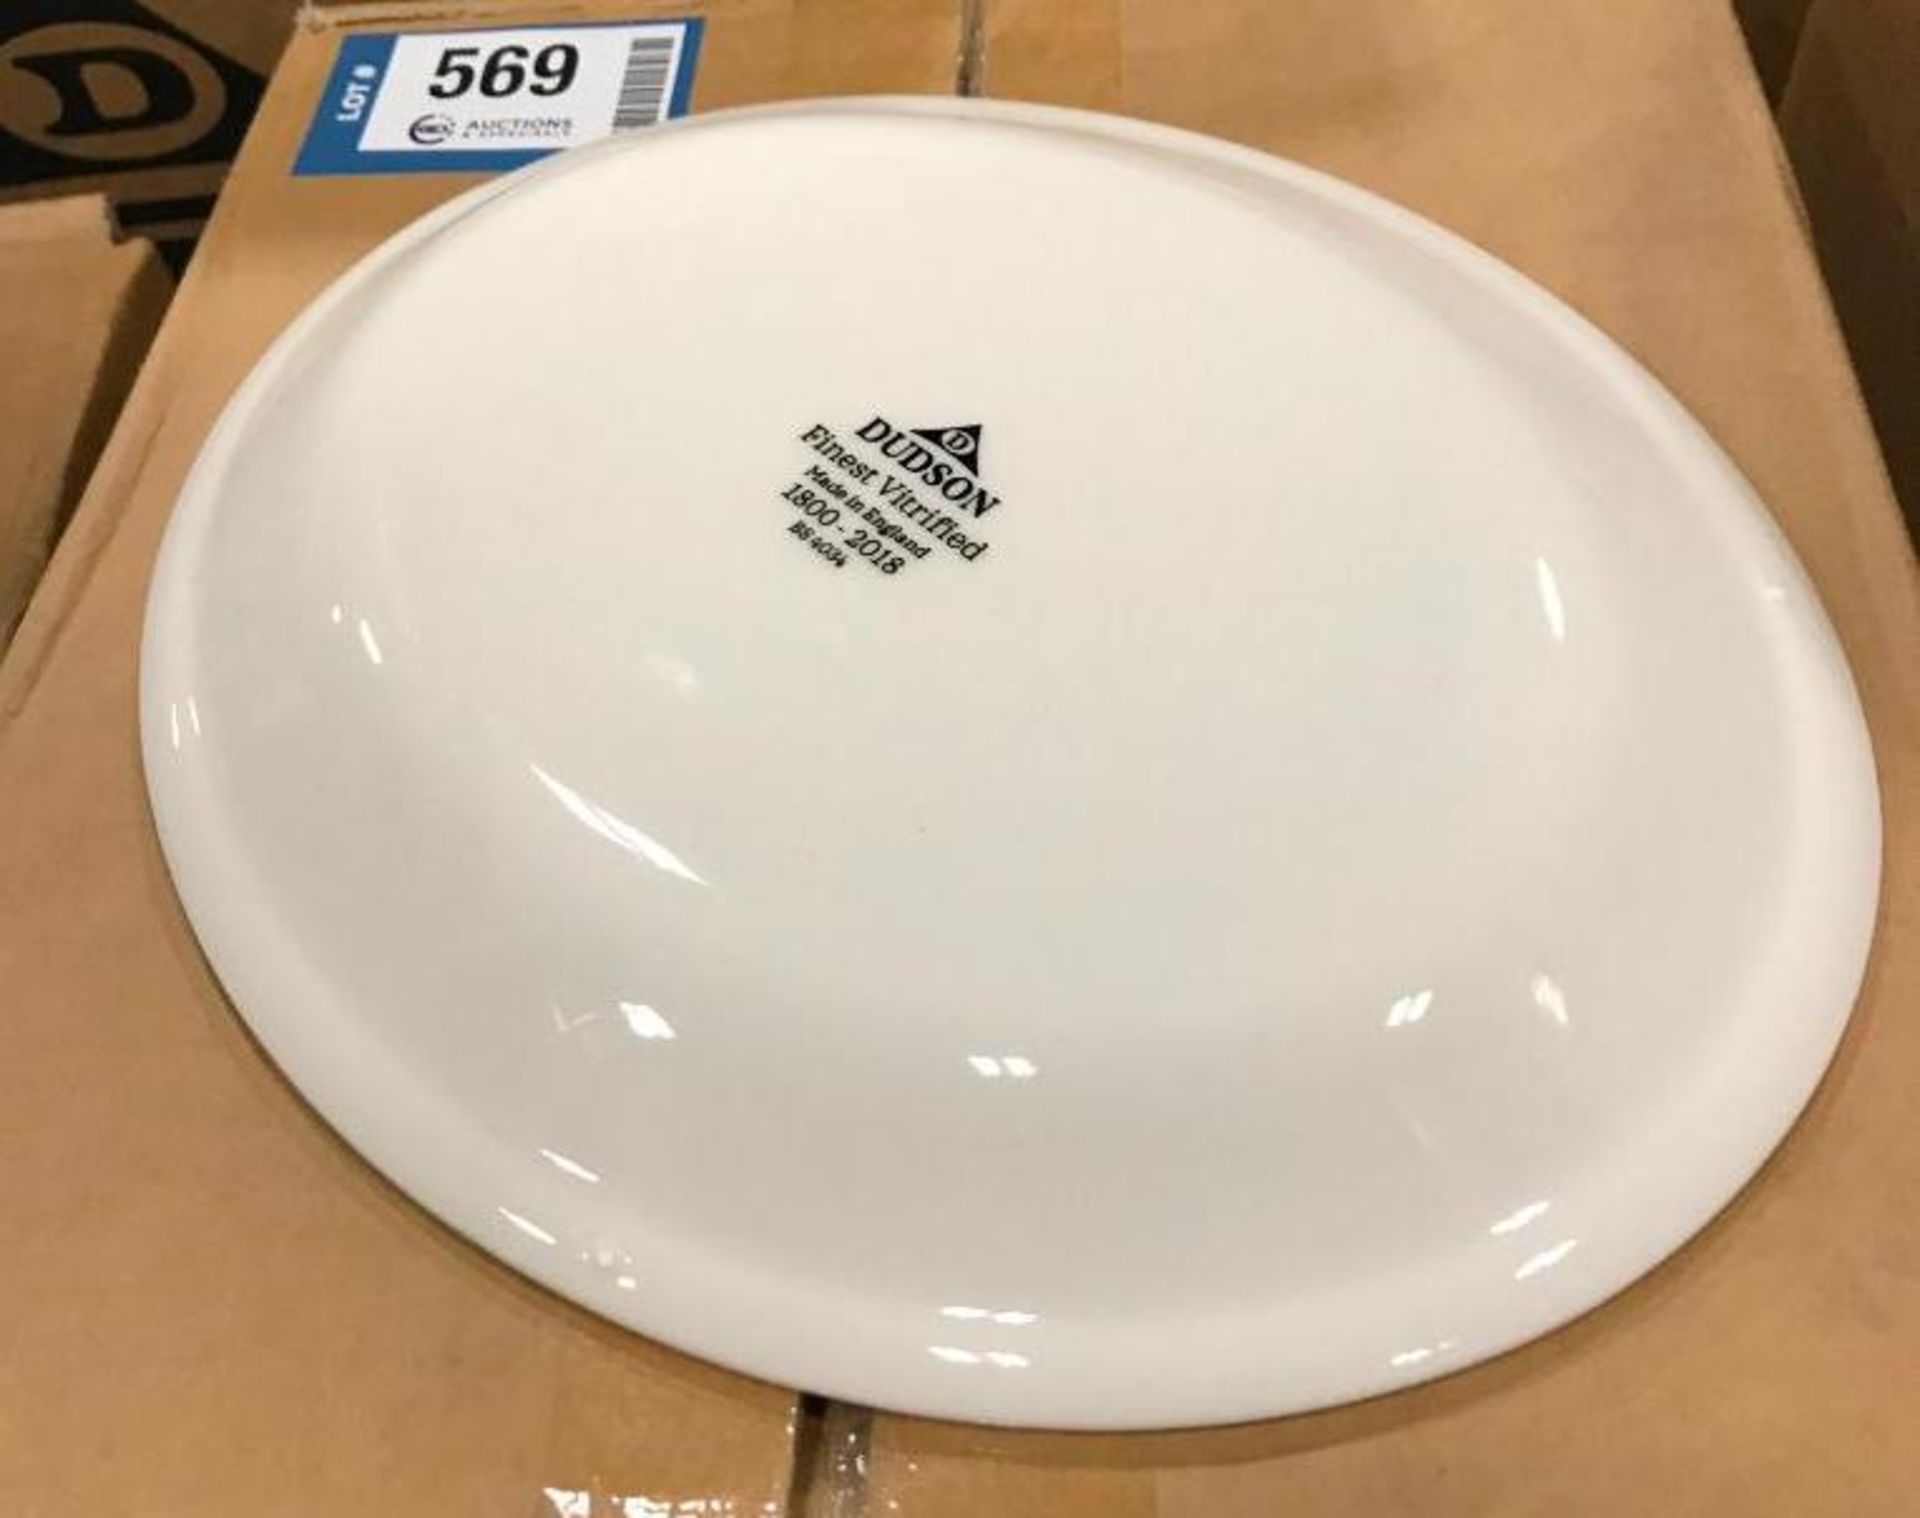 2 CASES OF DUDSON CLASSIC 8 7/8" OVAL PLATTER - 24/CASE, MADE IN ENGLAND - Image 2 of 4